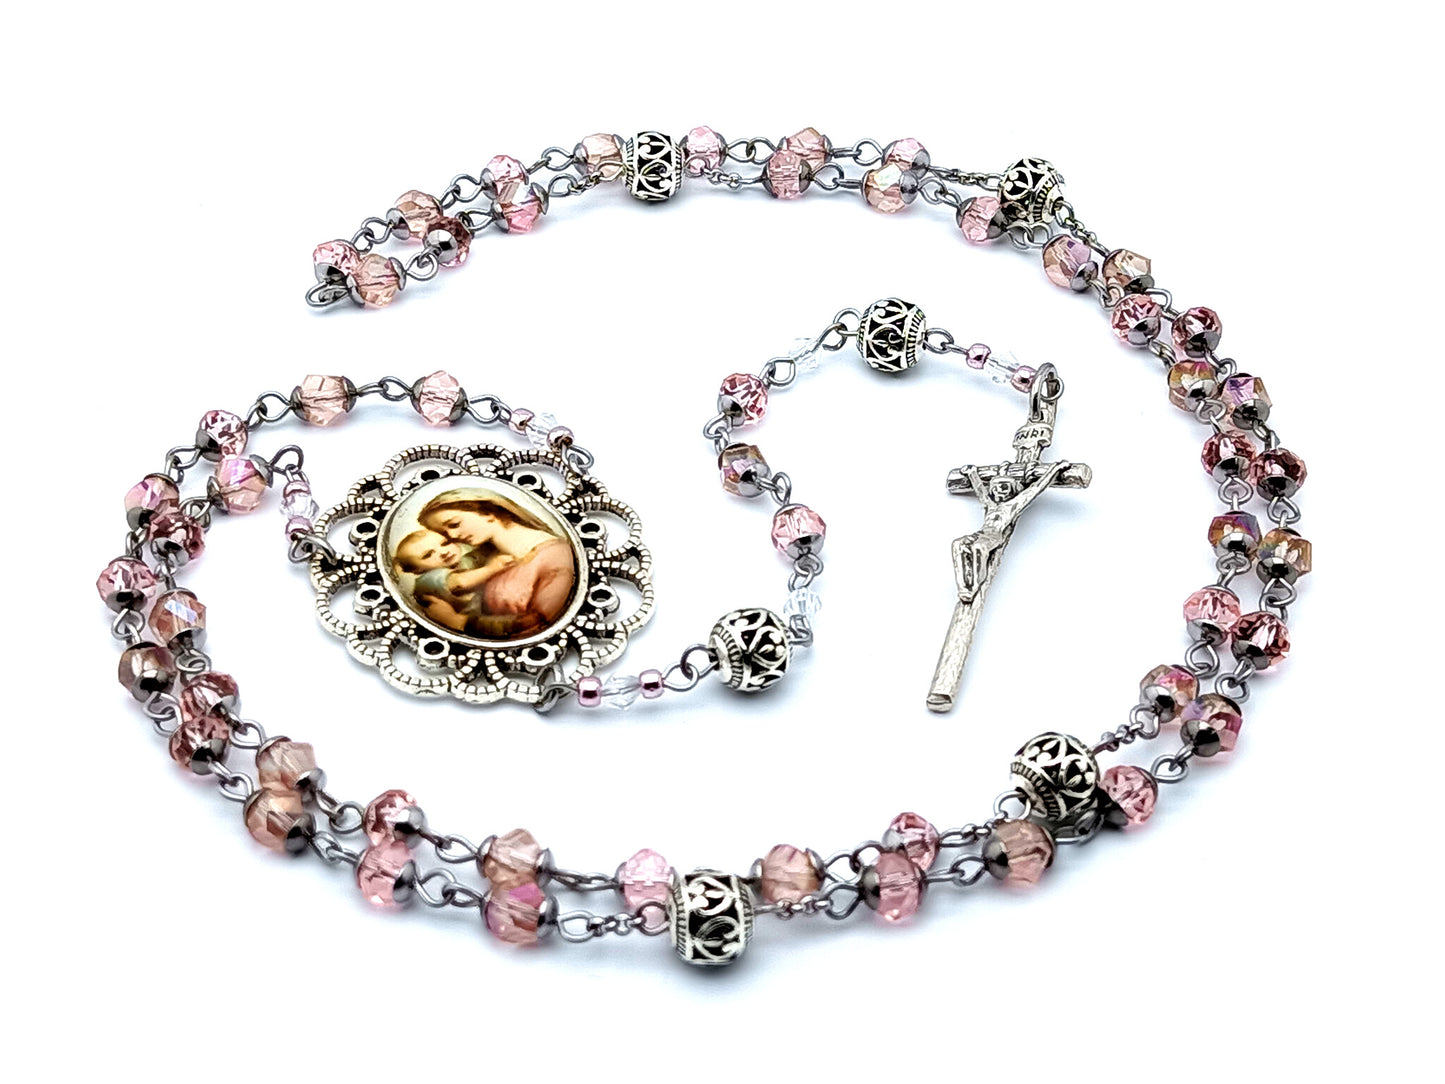 Madonna and Child unique rosary beads with rose faceted glass and Tibetan silver Our Father beads and Saint John Paul II crucifix.